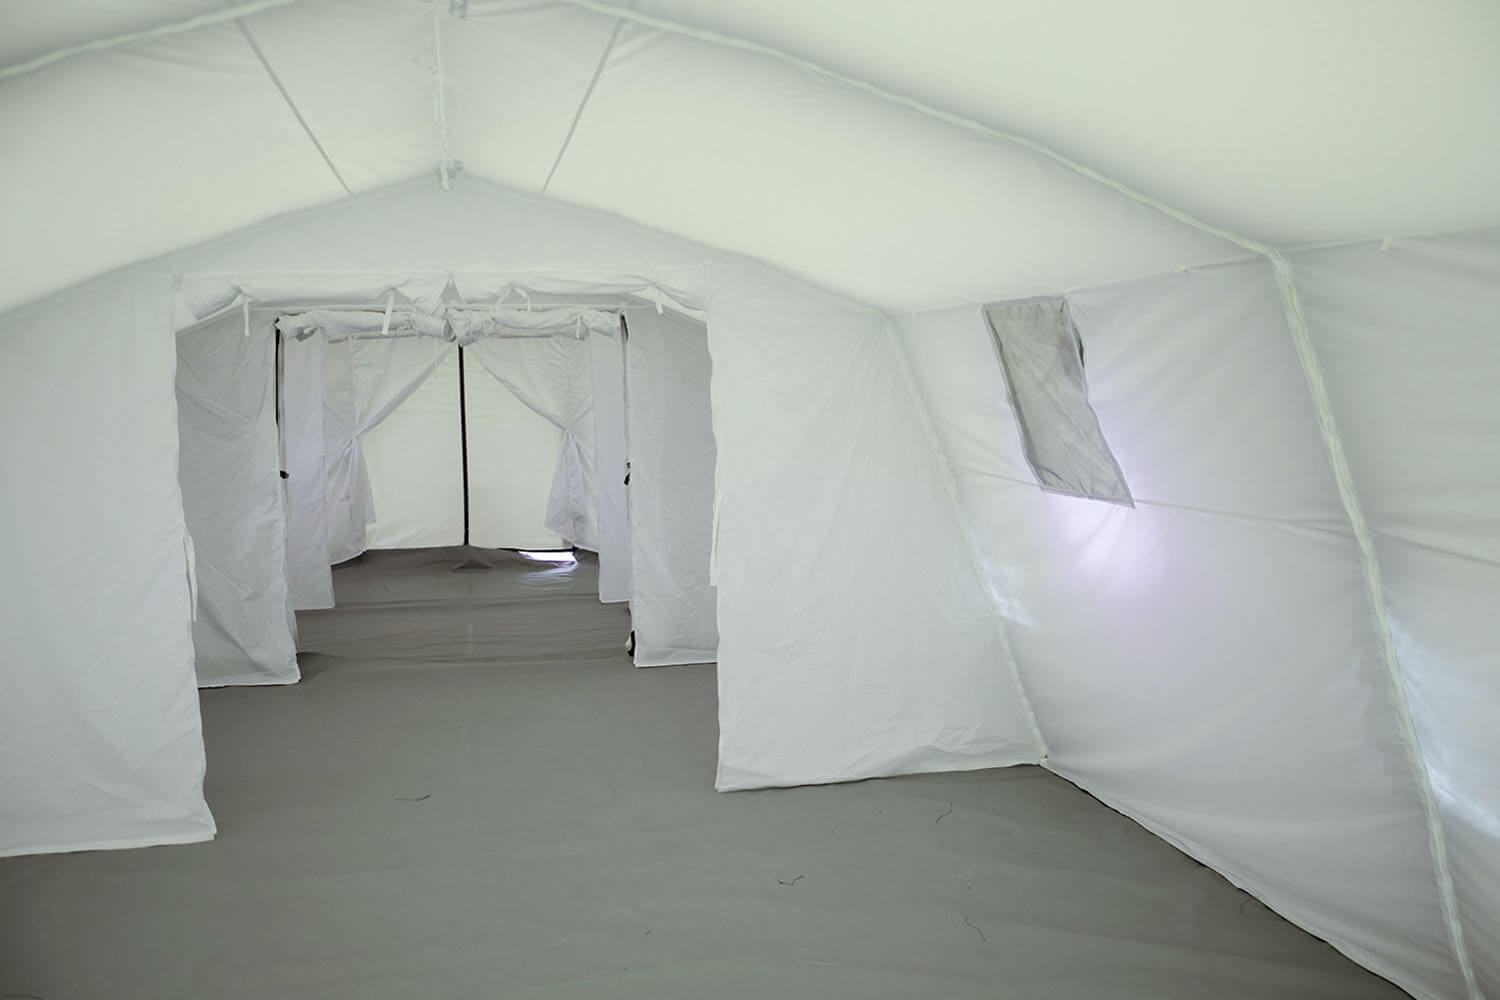 Multiple connected Nixus PGK medical tents